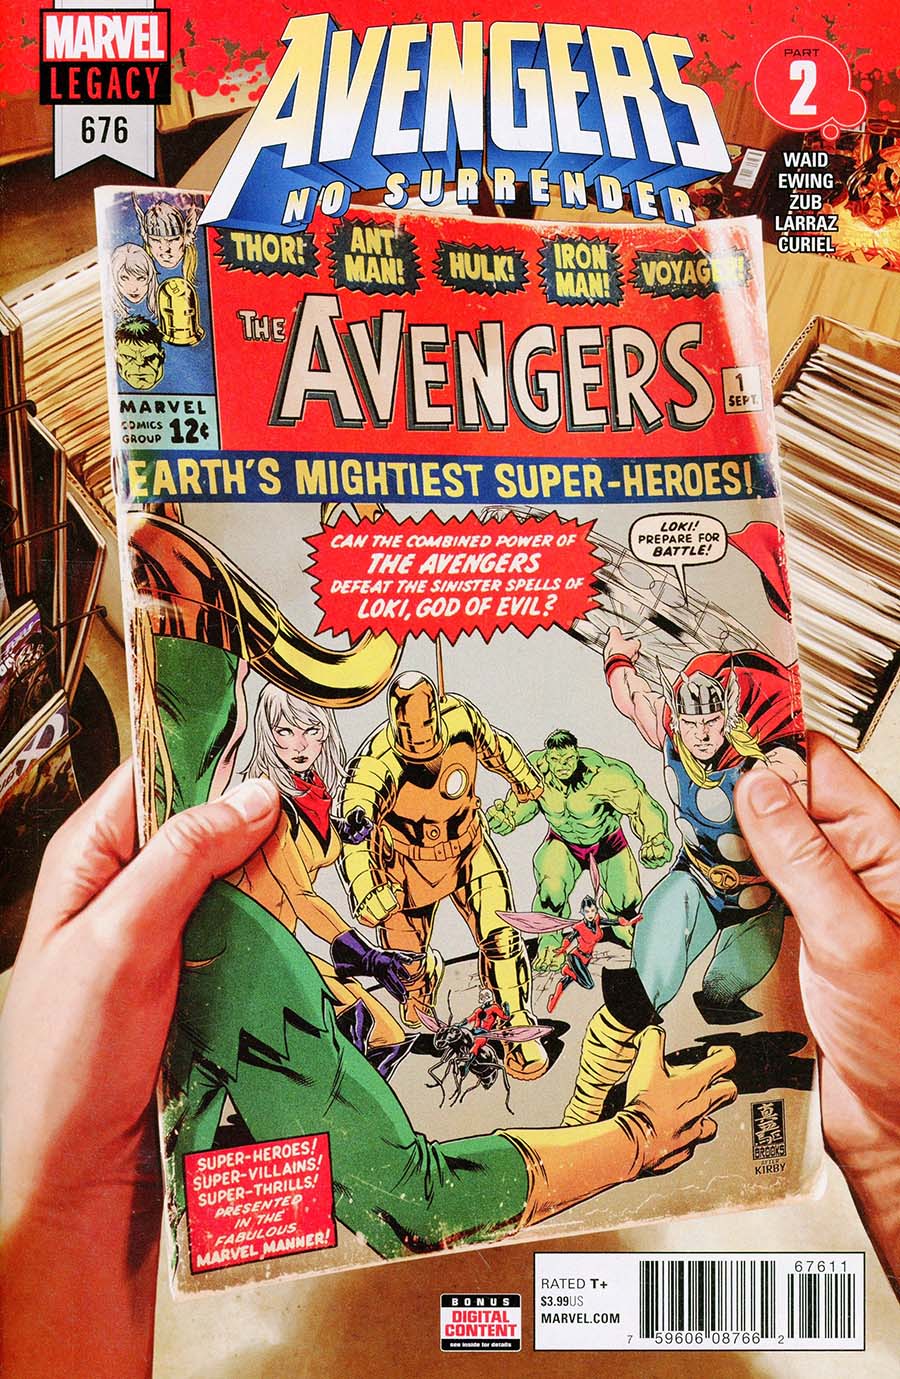 Avengers Vol 6 #676 Cover A Regular Mark Brooks Cover (No Surrender Part 2)(Marvel Legacy Tie-In)